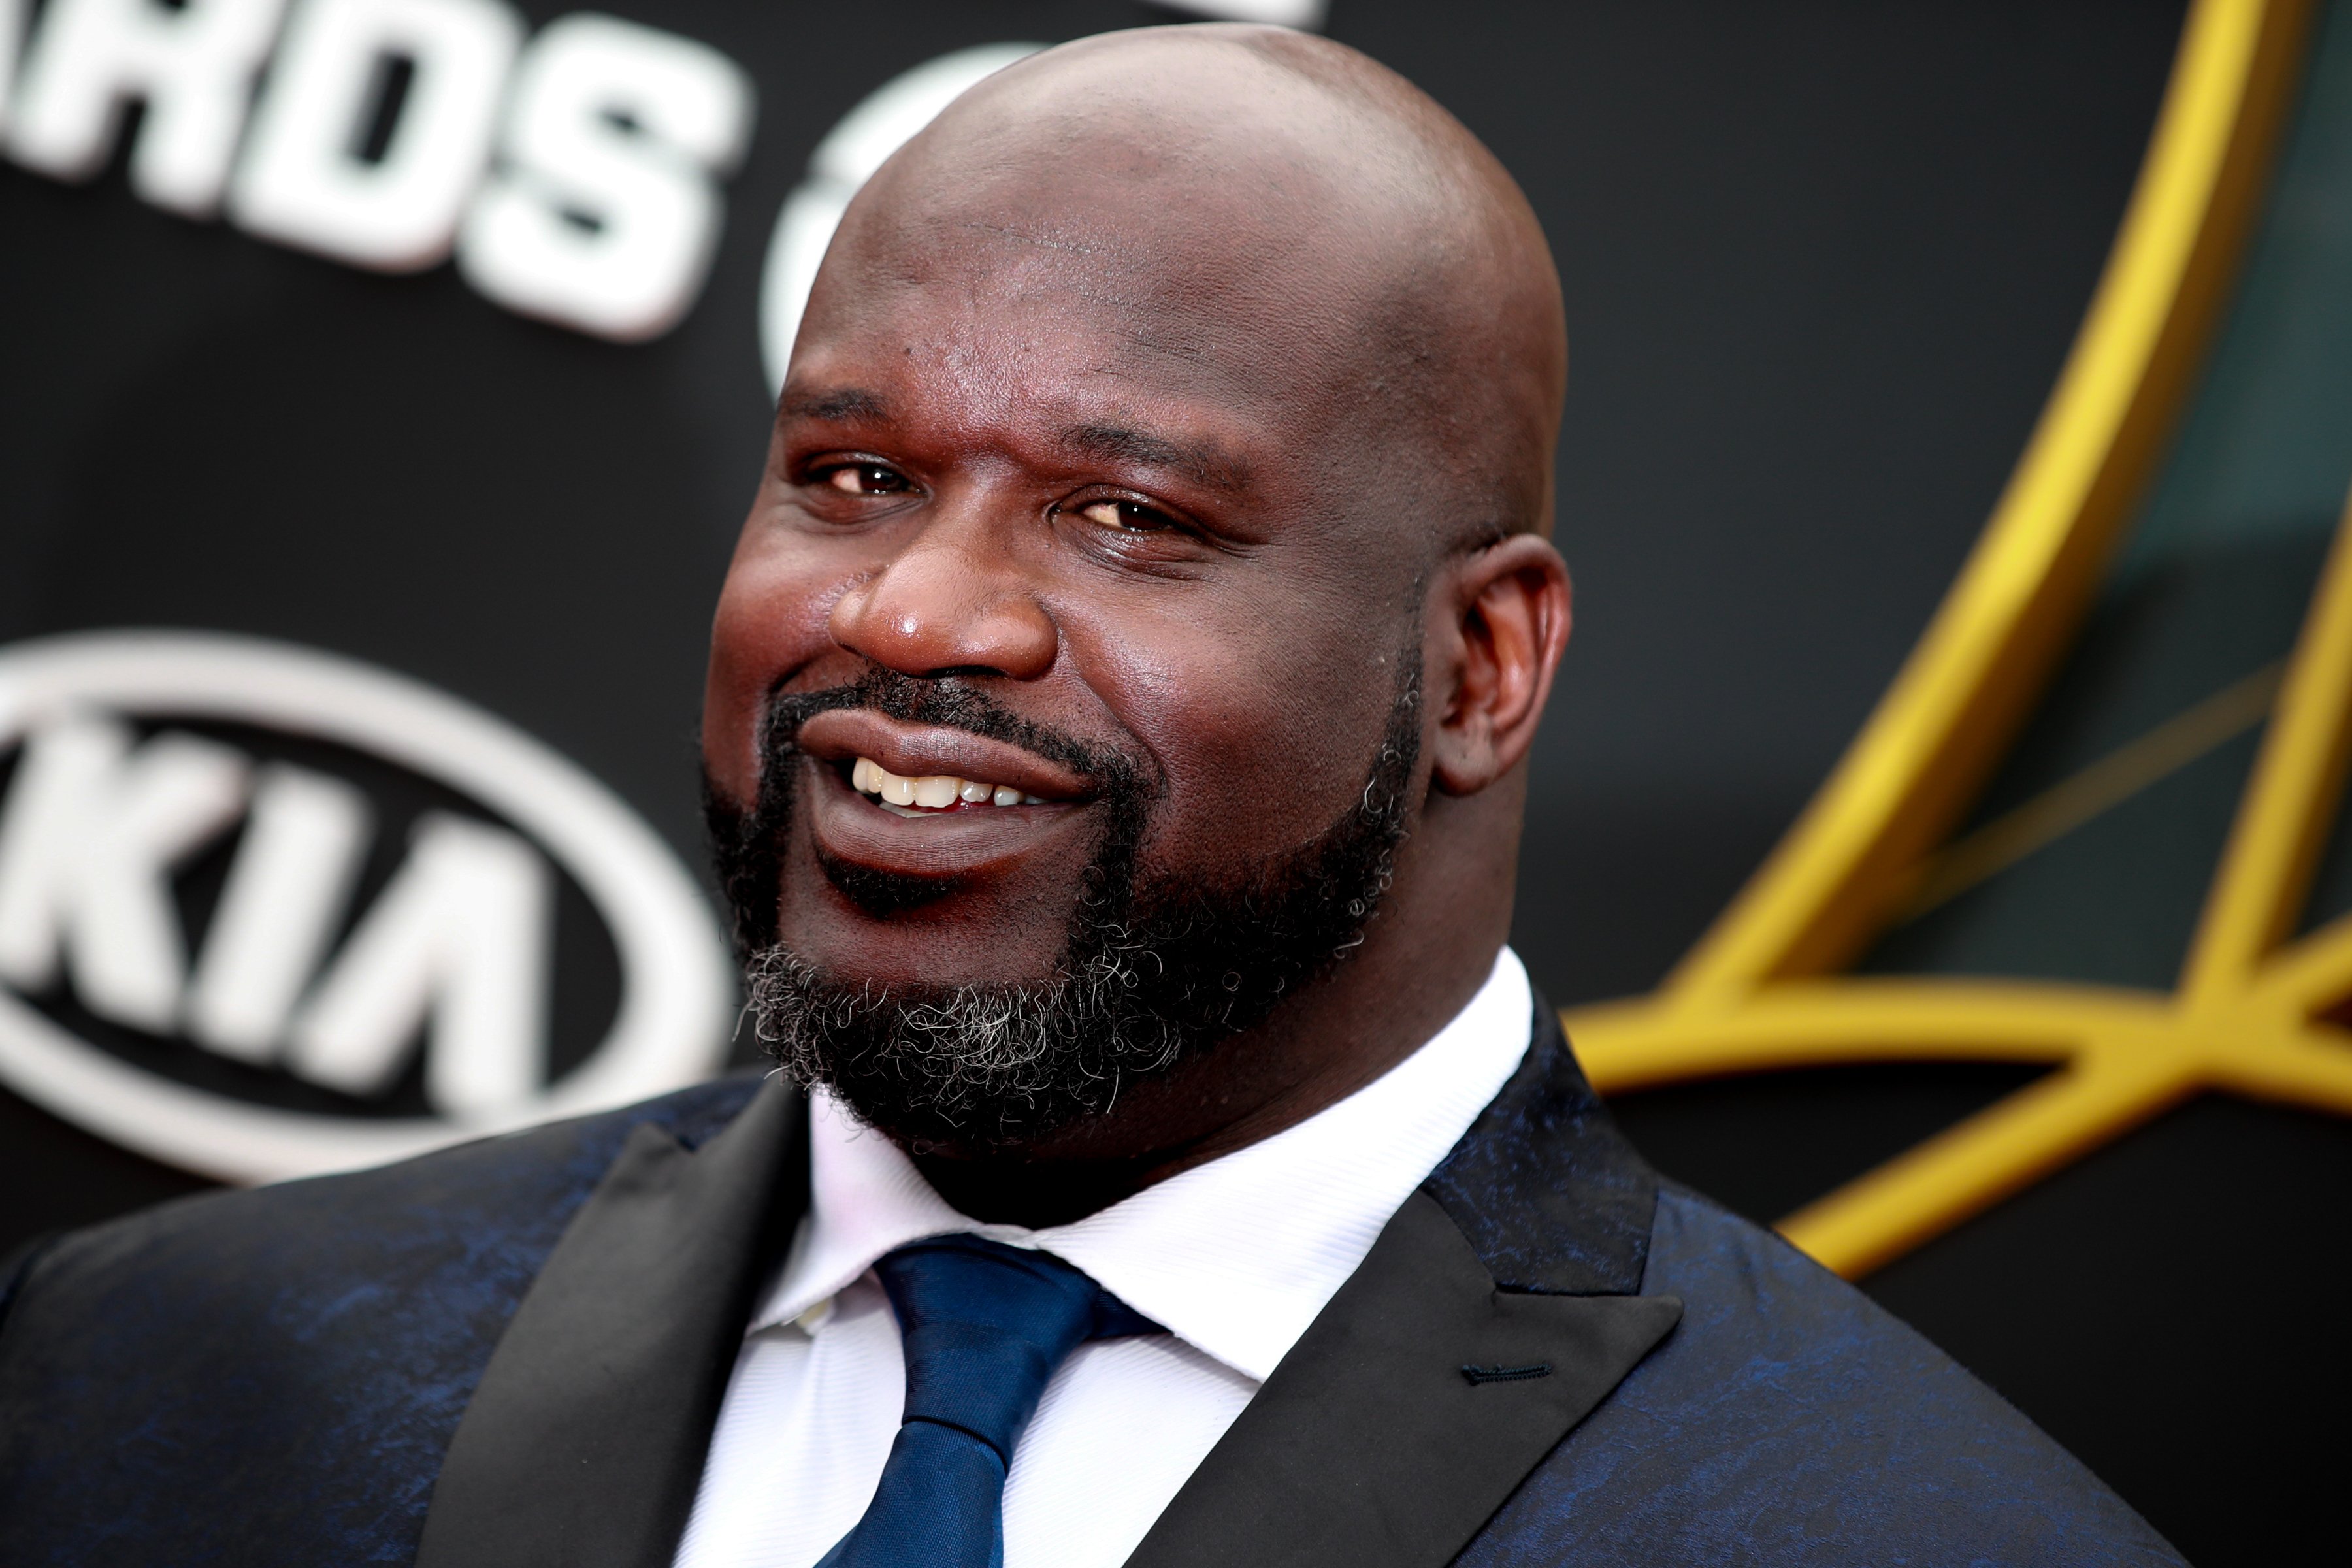 Shaquille O'Neal at the 2019 NBA Awards on June 24, 2019 in Santa Monica, California. | Source: Getty Images